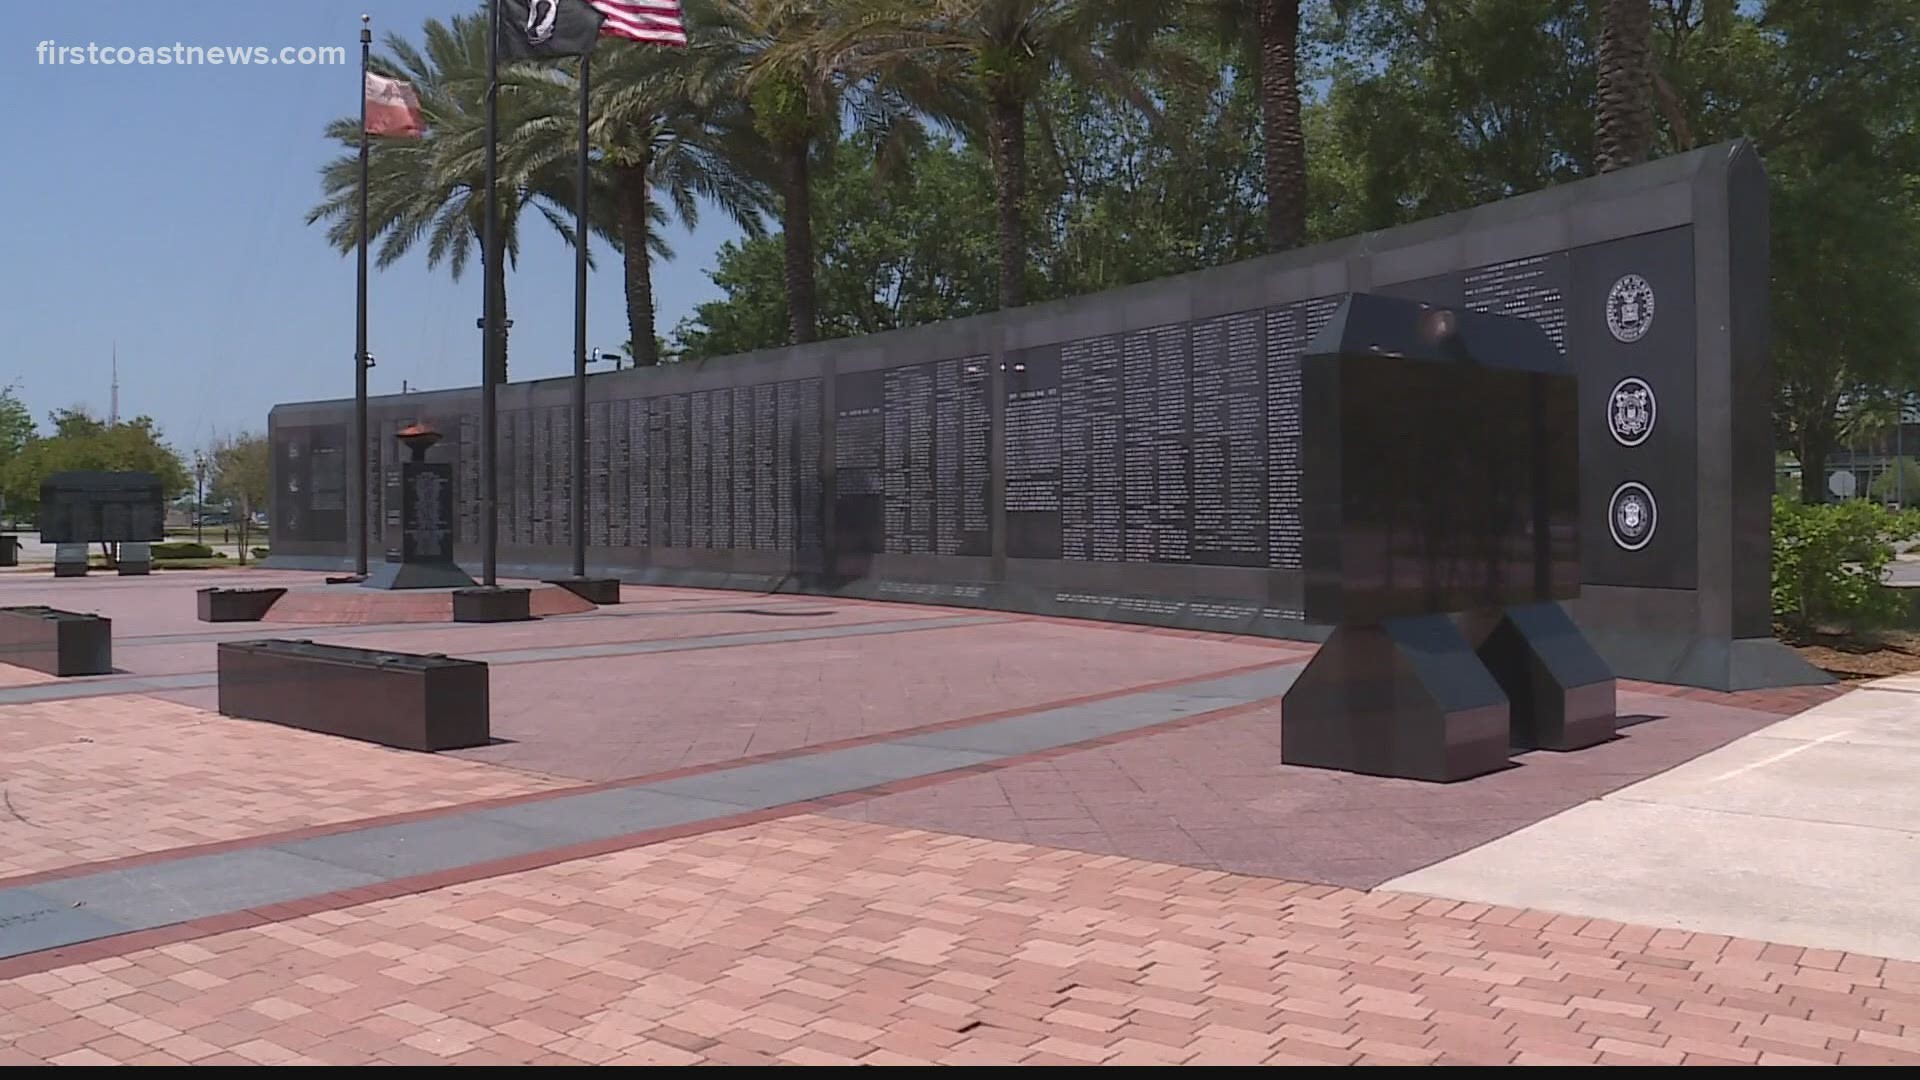 The Vietnam War ended in 1975, but for some, the fight to include the names of their now-deceased loved ones on a Veterans Memorial Wall is an ongoing battle.